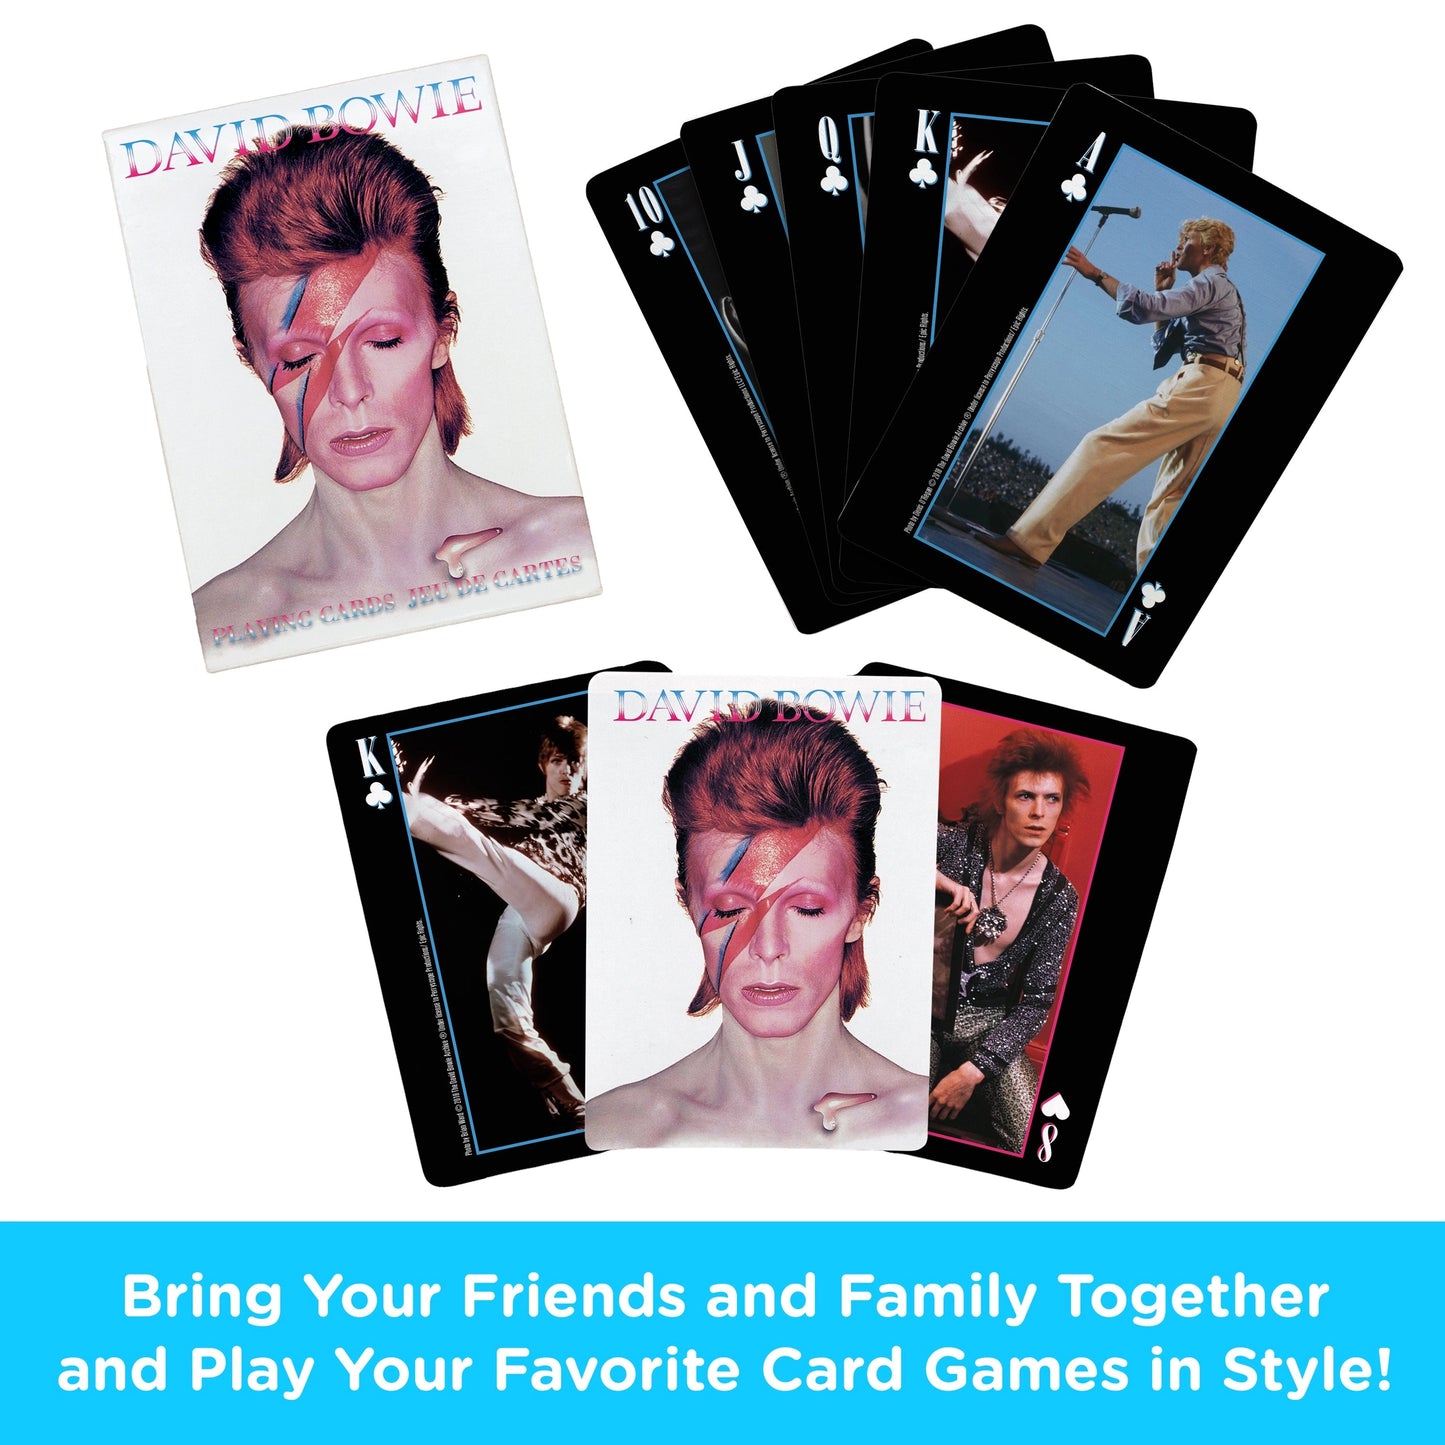 David Bowie Playing Cards by Aquarius - A Tribute to the Iconic Star